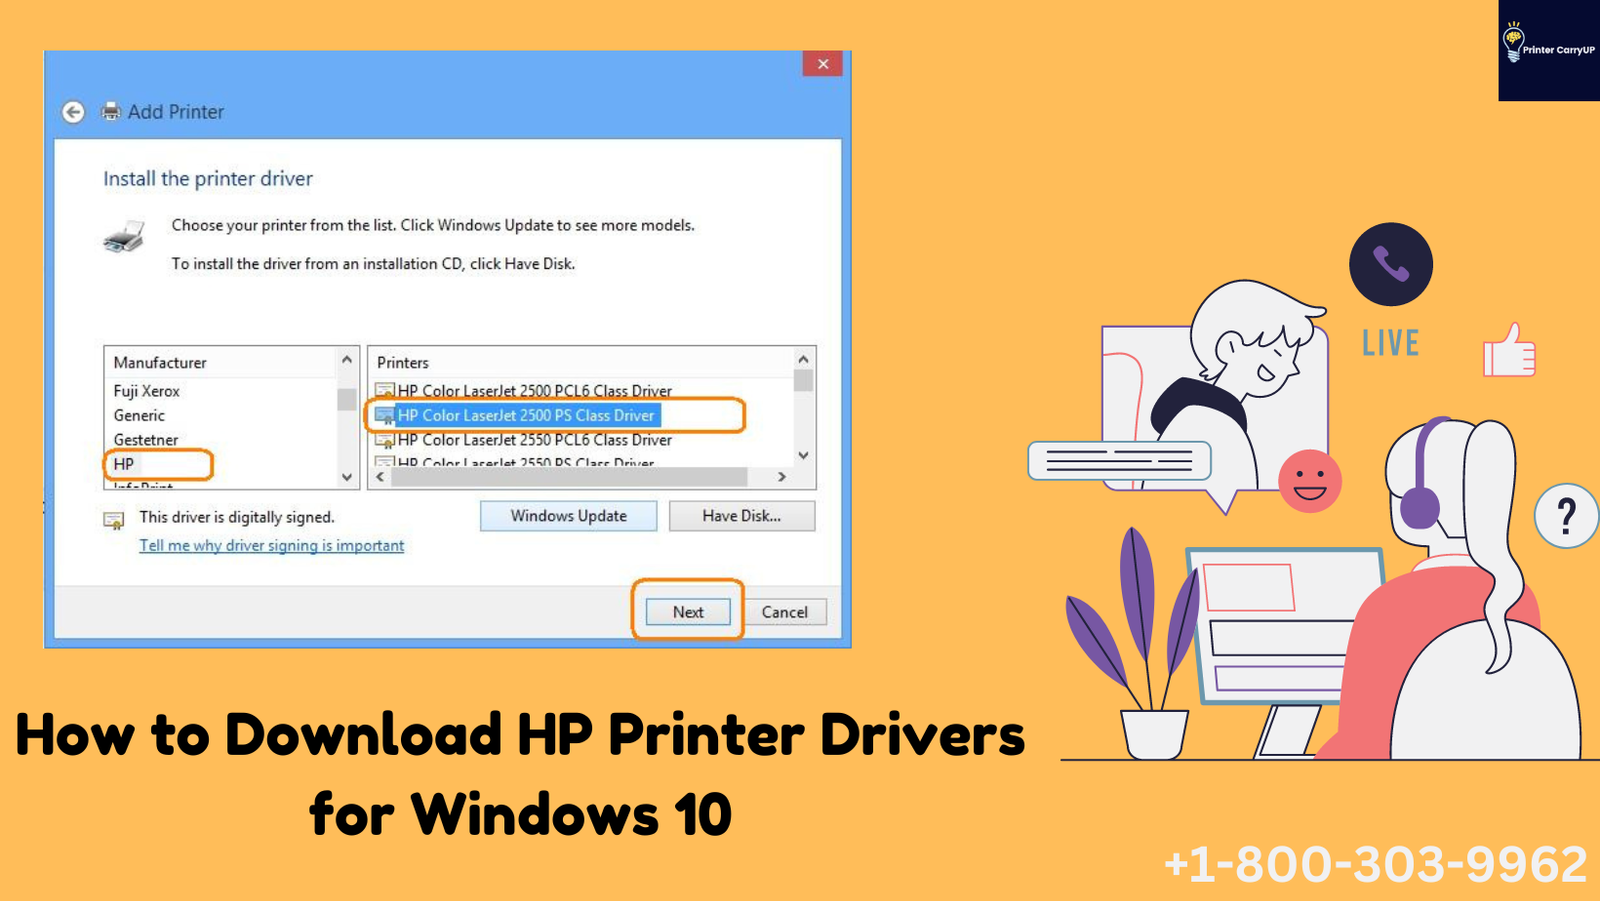 How to download HP printer drivers for Windows 10